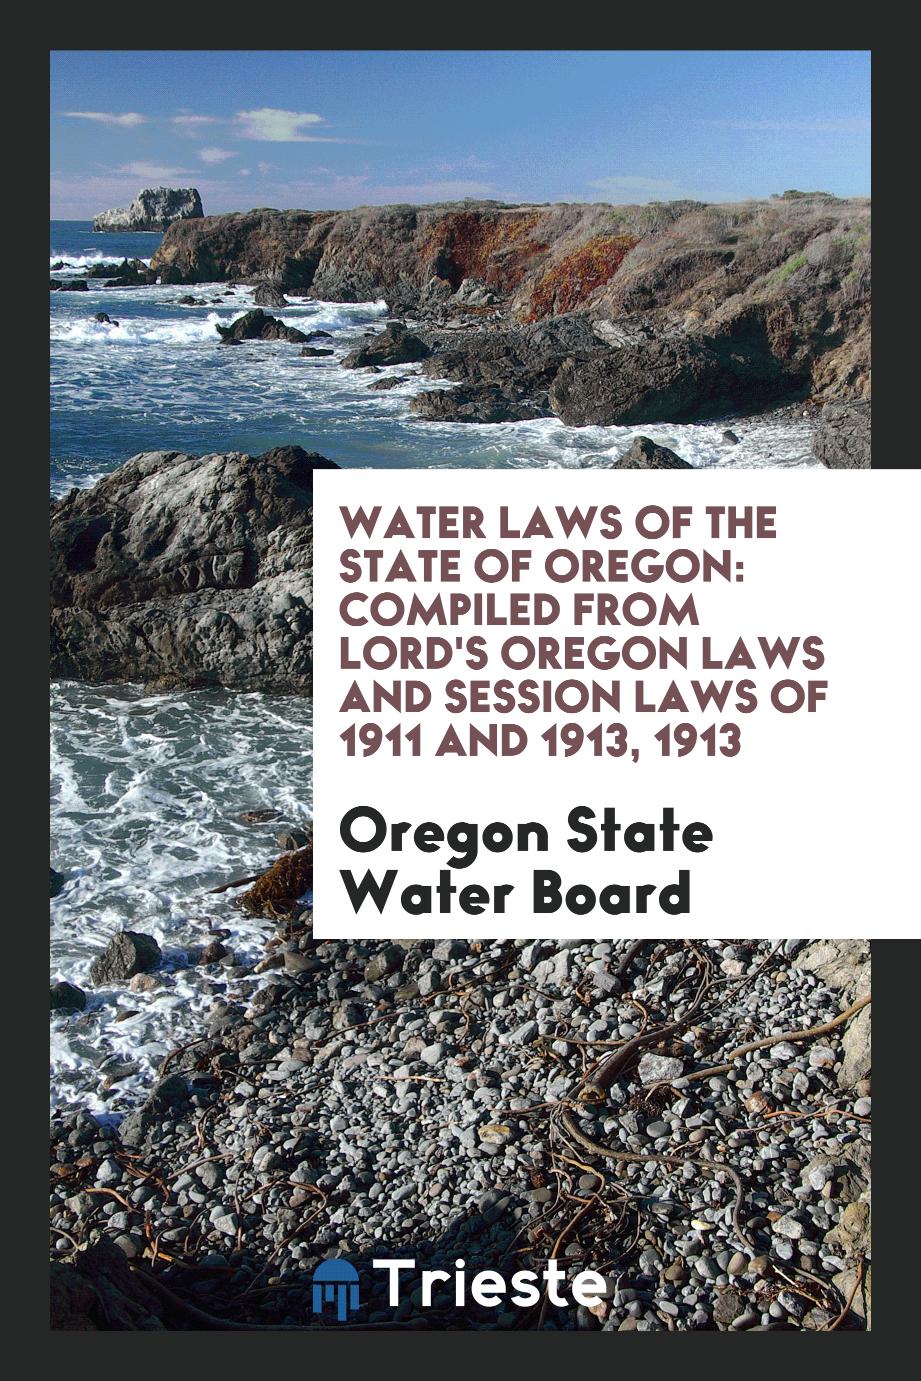 Water Laws of the State of Oregon: Compiled from Lord's Oregon Laws and Session Laws of 1911 and 1913, 1913